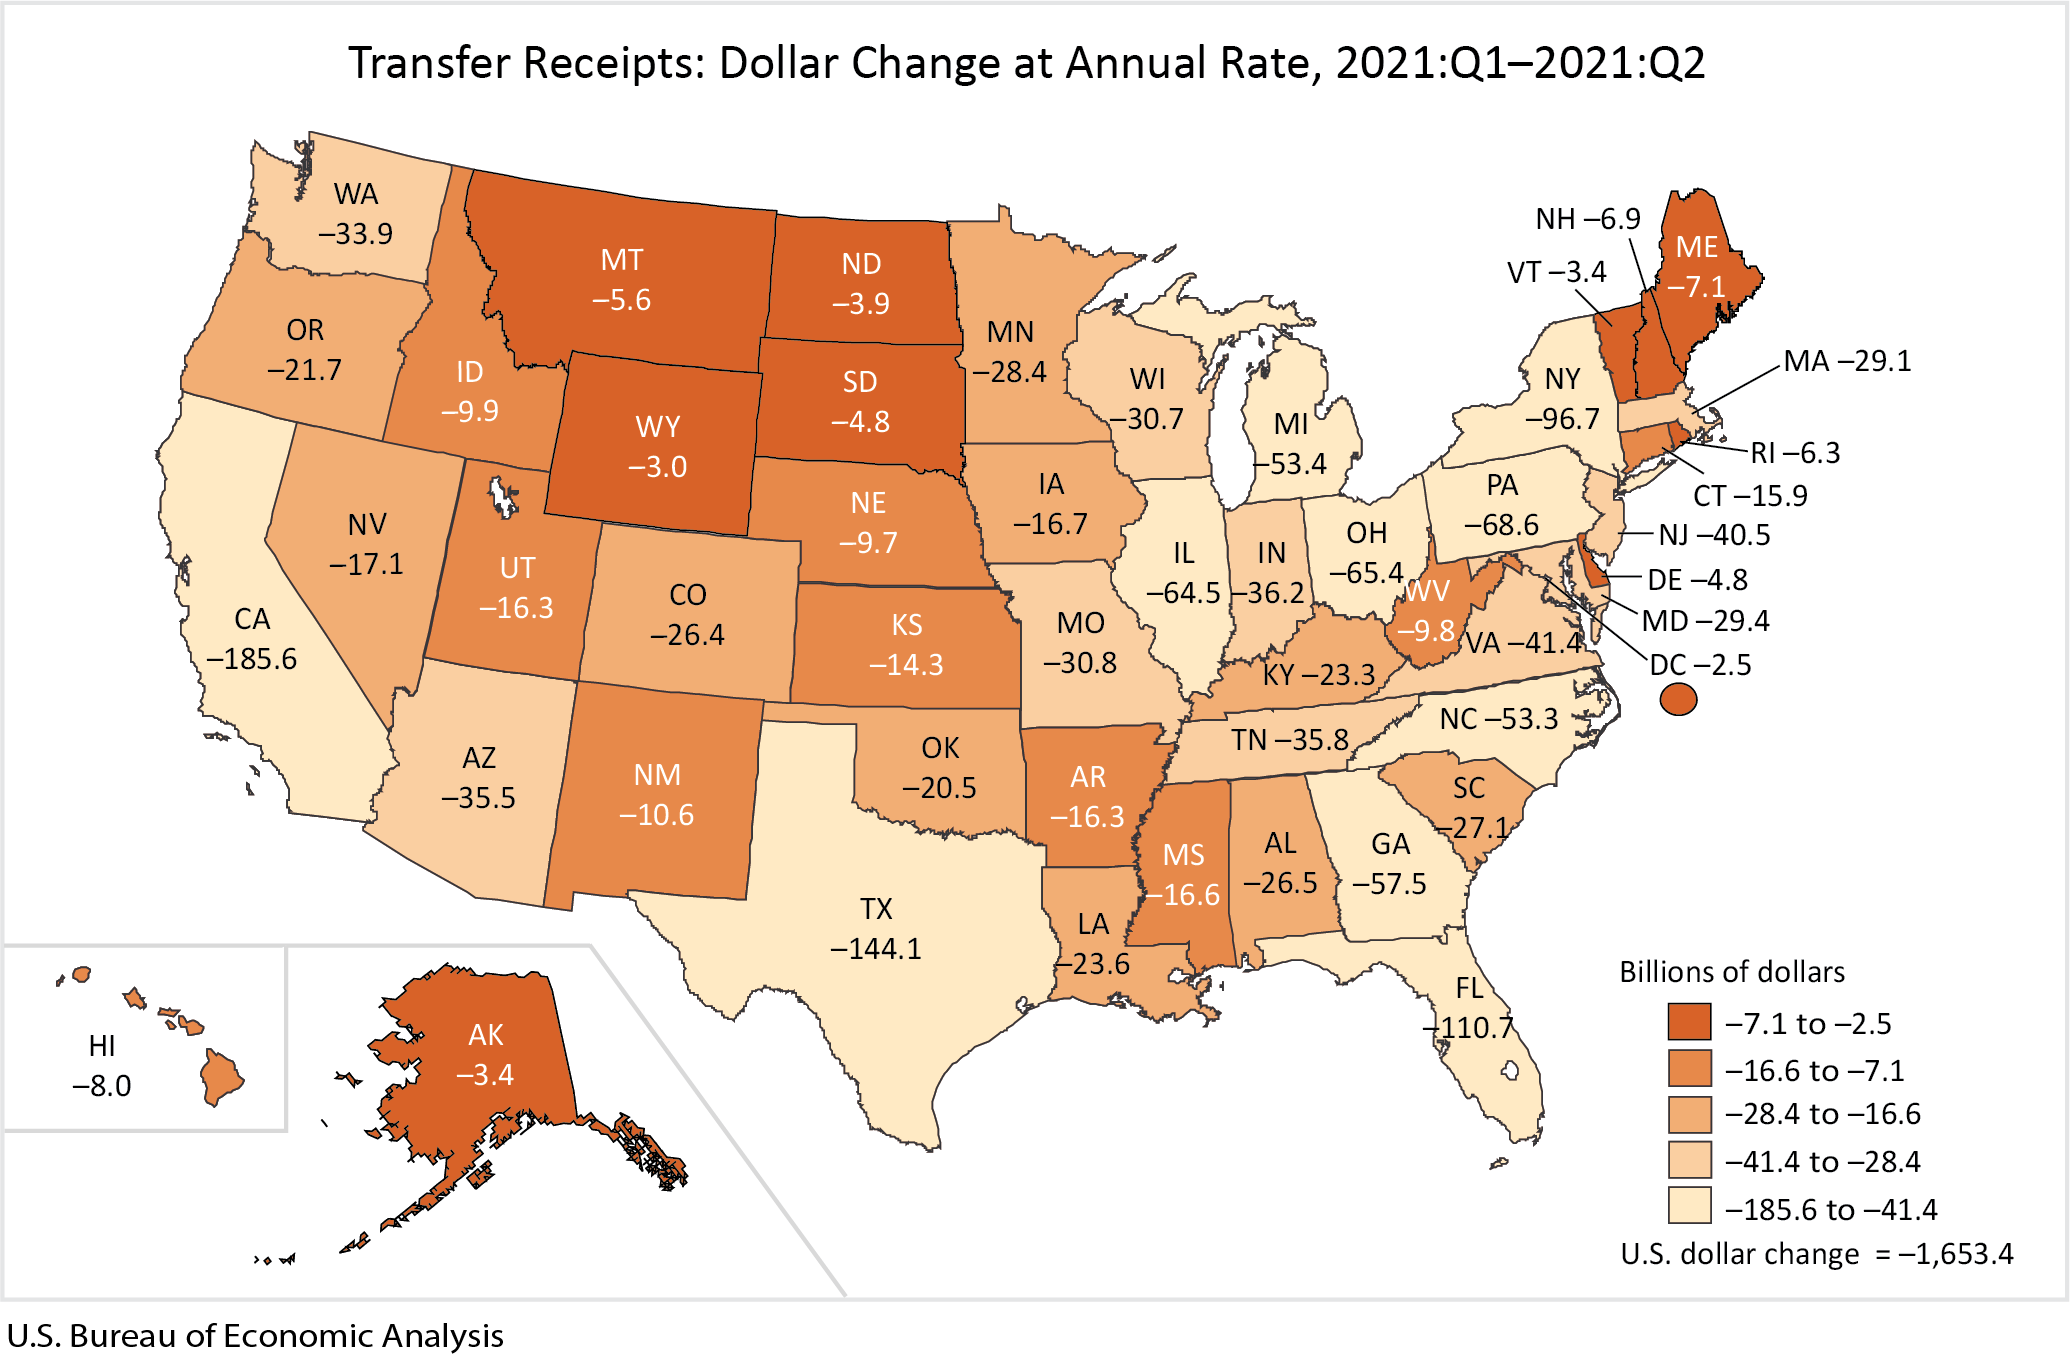 Chart 2. Dollar Change in Personal Current Transfer Receipts, US, 2021:Q1-2021Q2